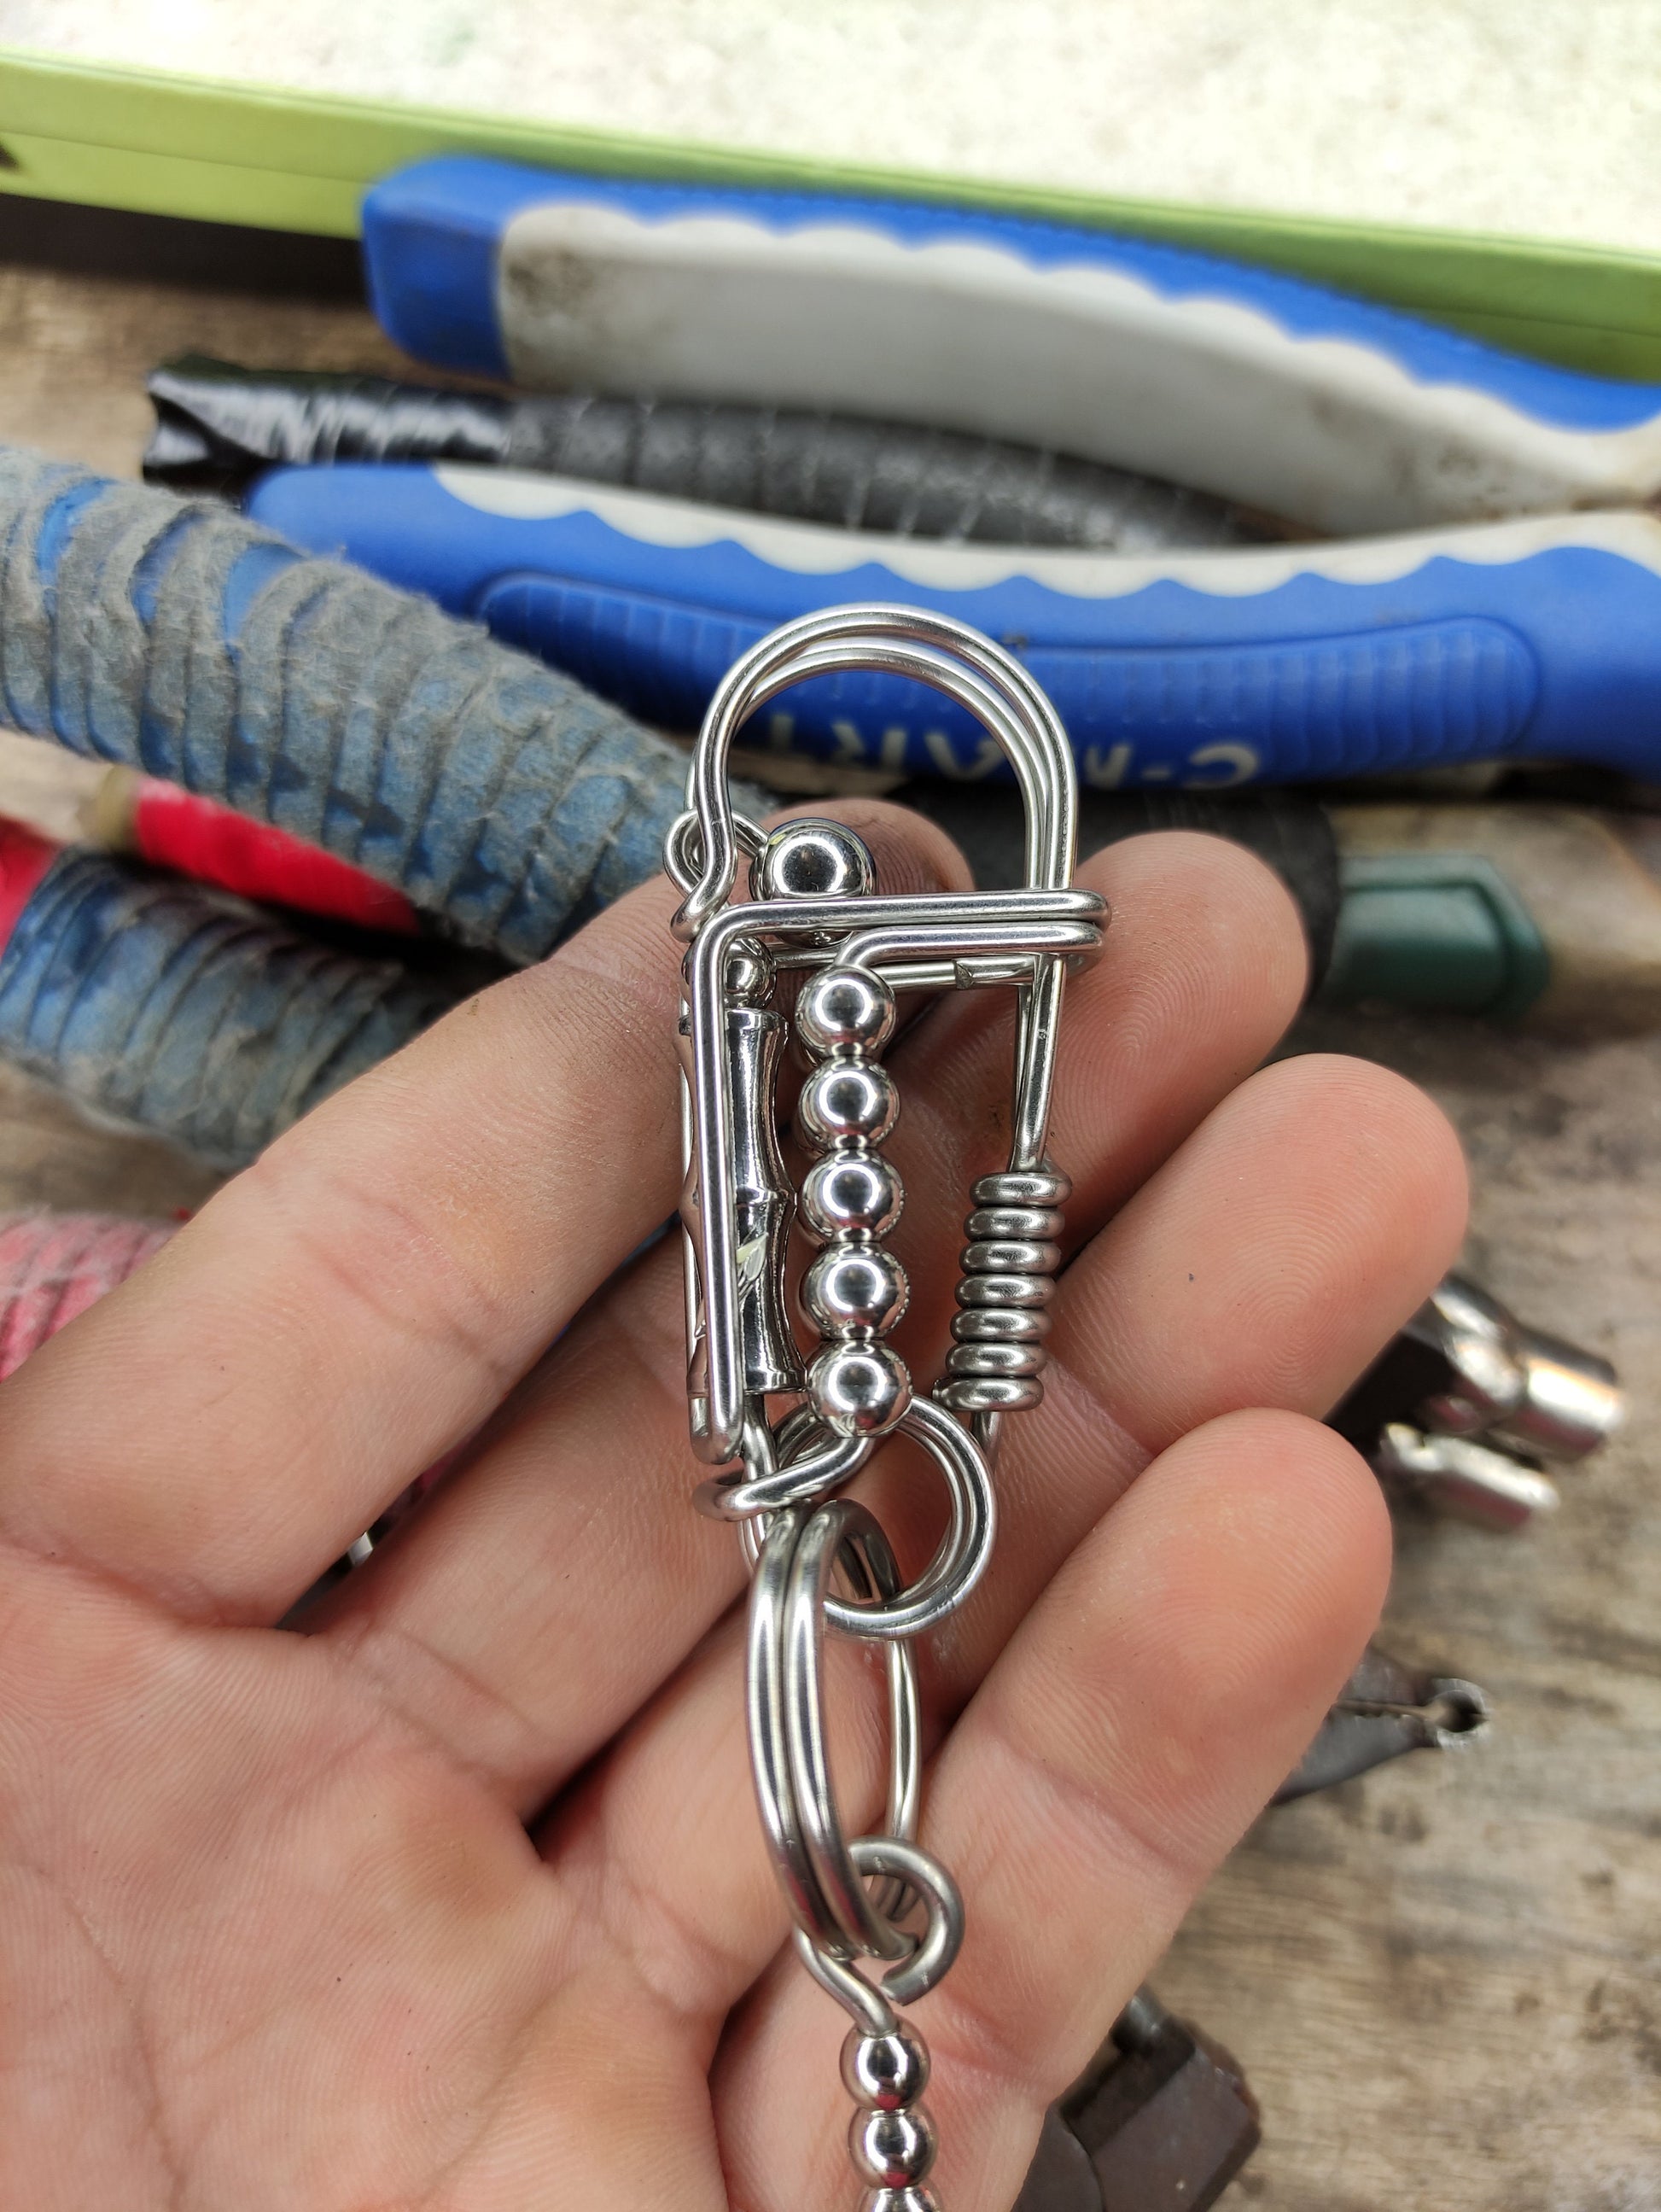 Handmade keychain made from stainless steel wire, the most unique